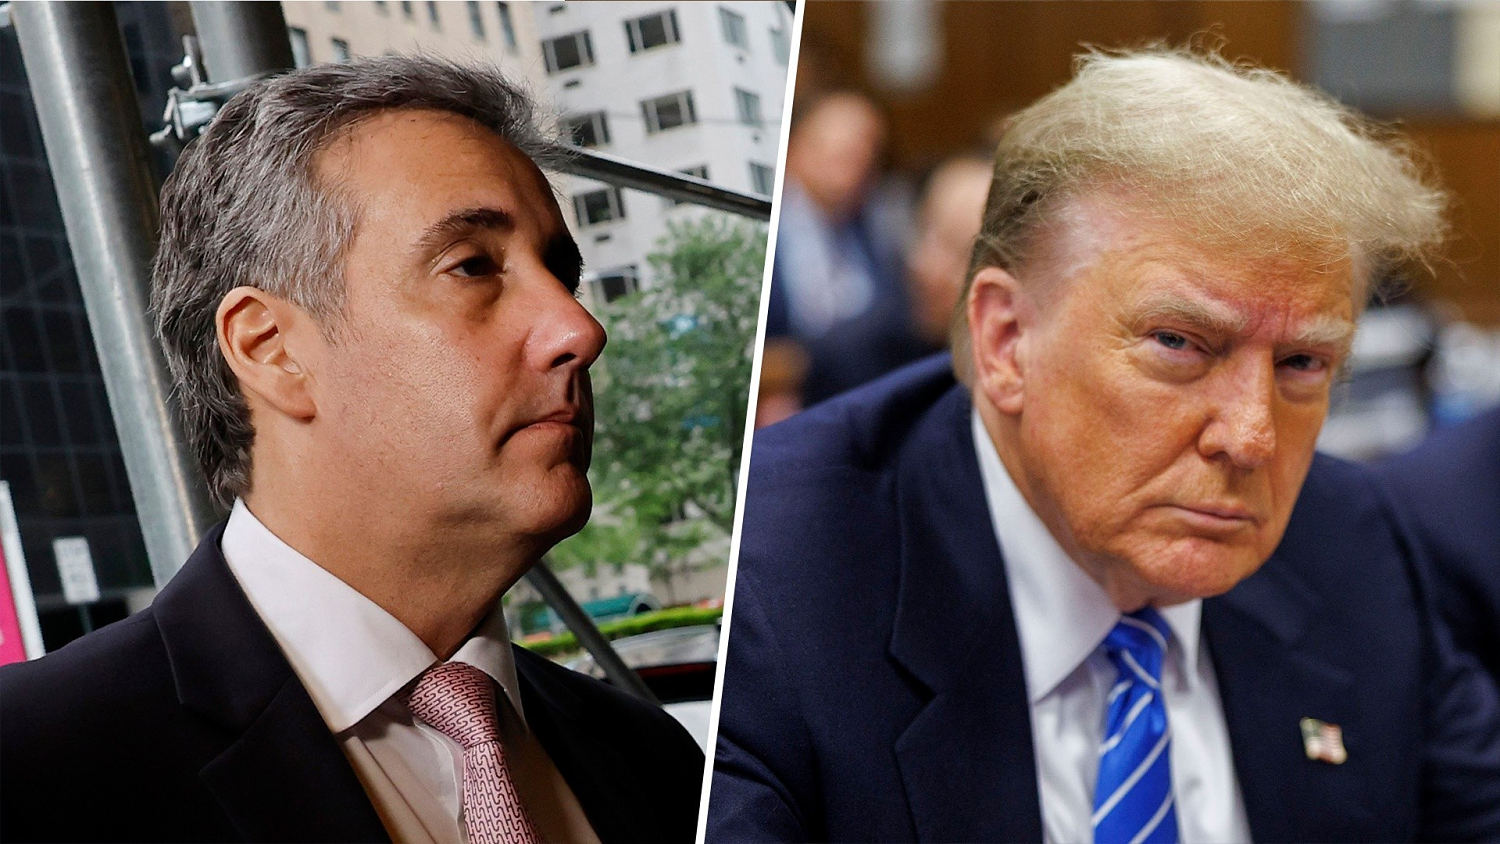 Cohen testimony connects Trump to hush money payment scheme